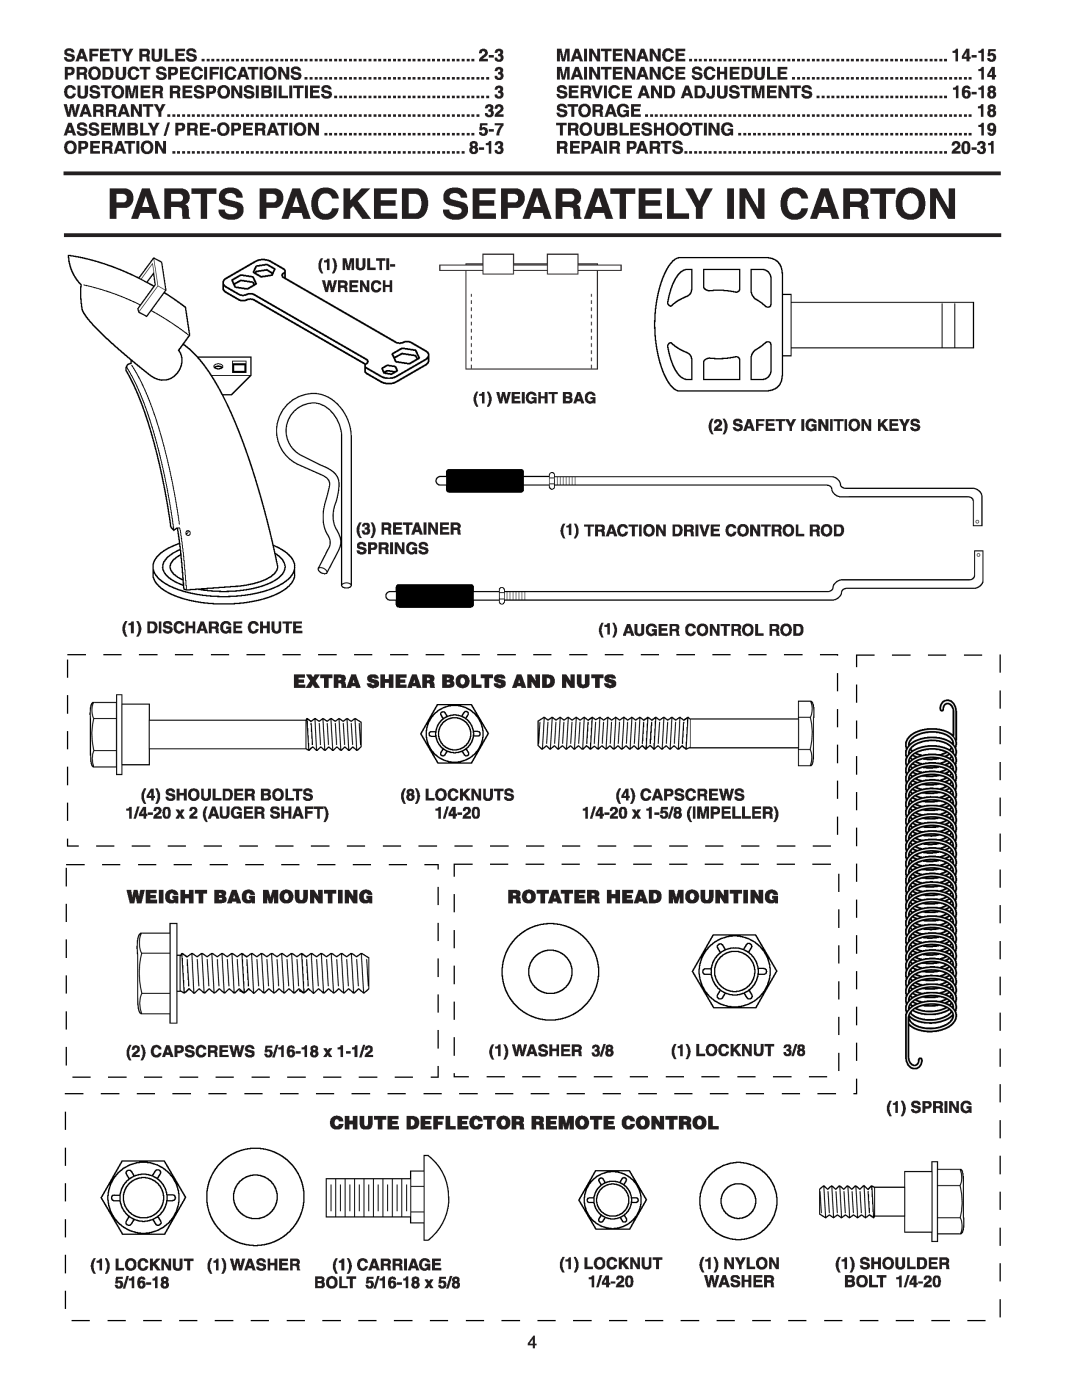 Poulan 183615 owner manual Parts Packed Separately In Carton, 8-13, 14-15, Service And Adjustments, 16-18, 20-31 